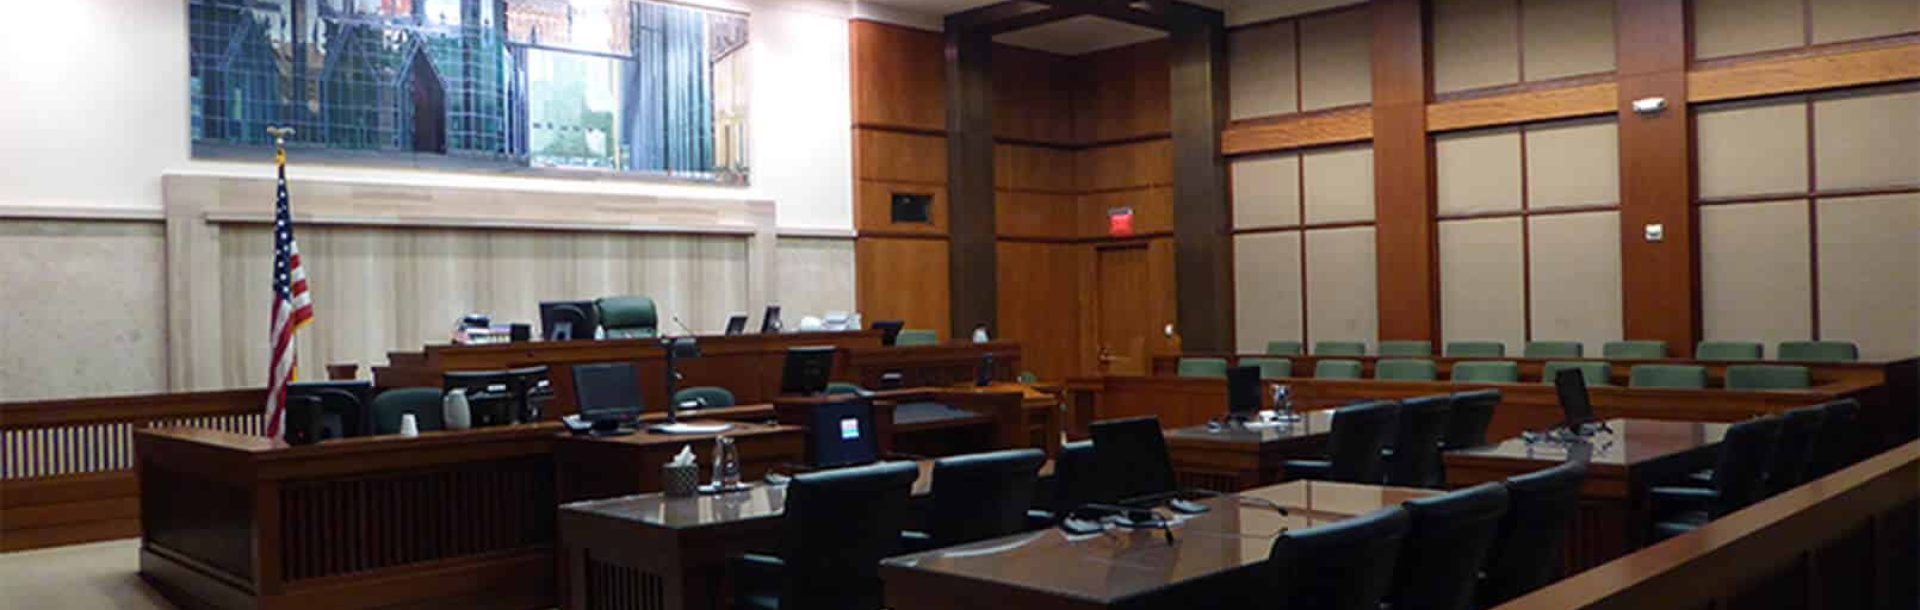 PAWDC Courtroom 2